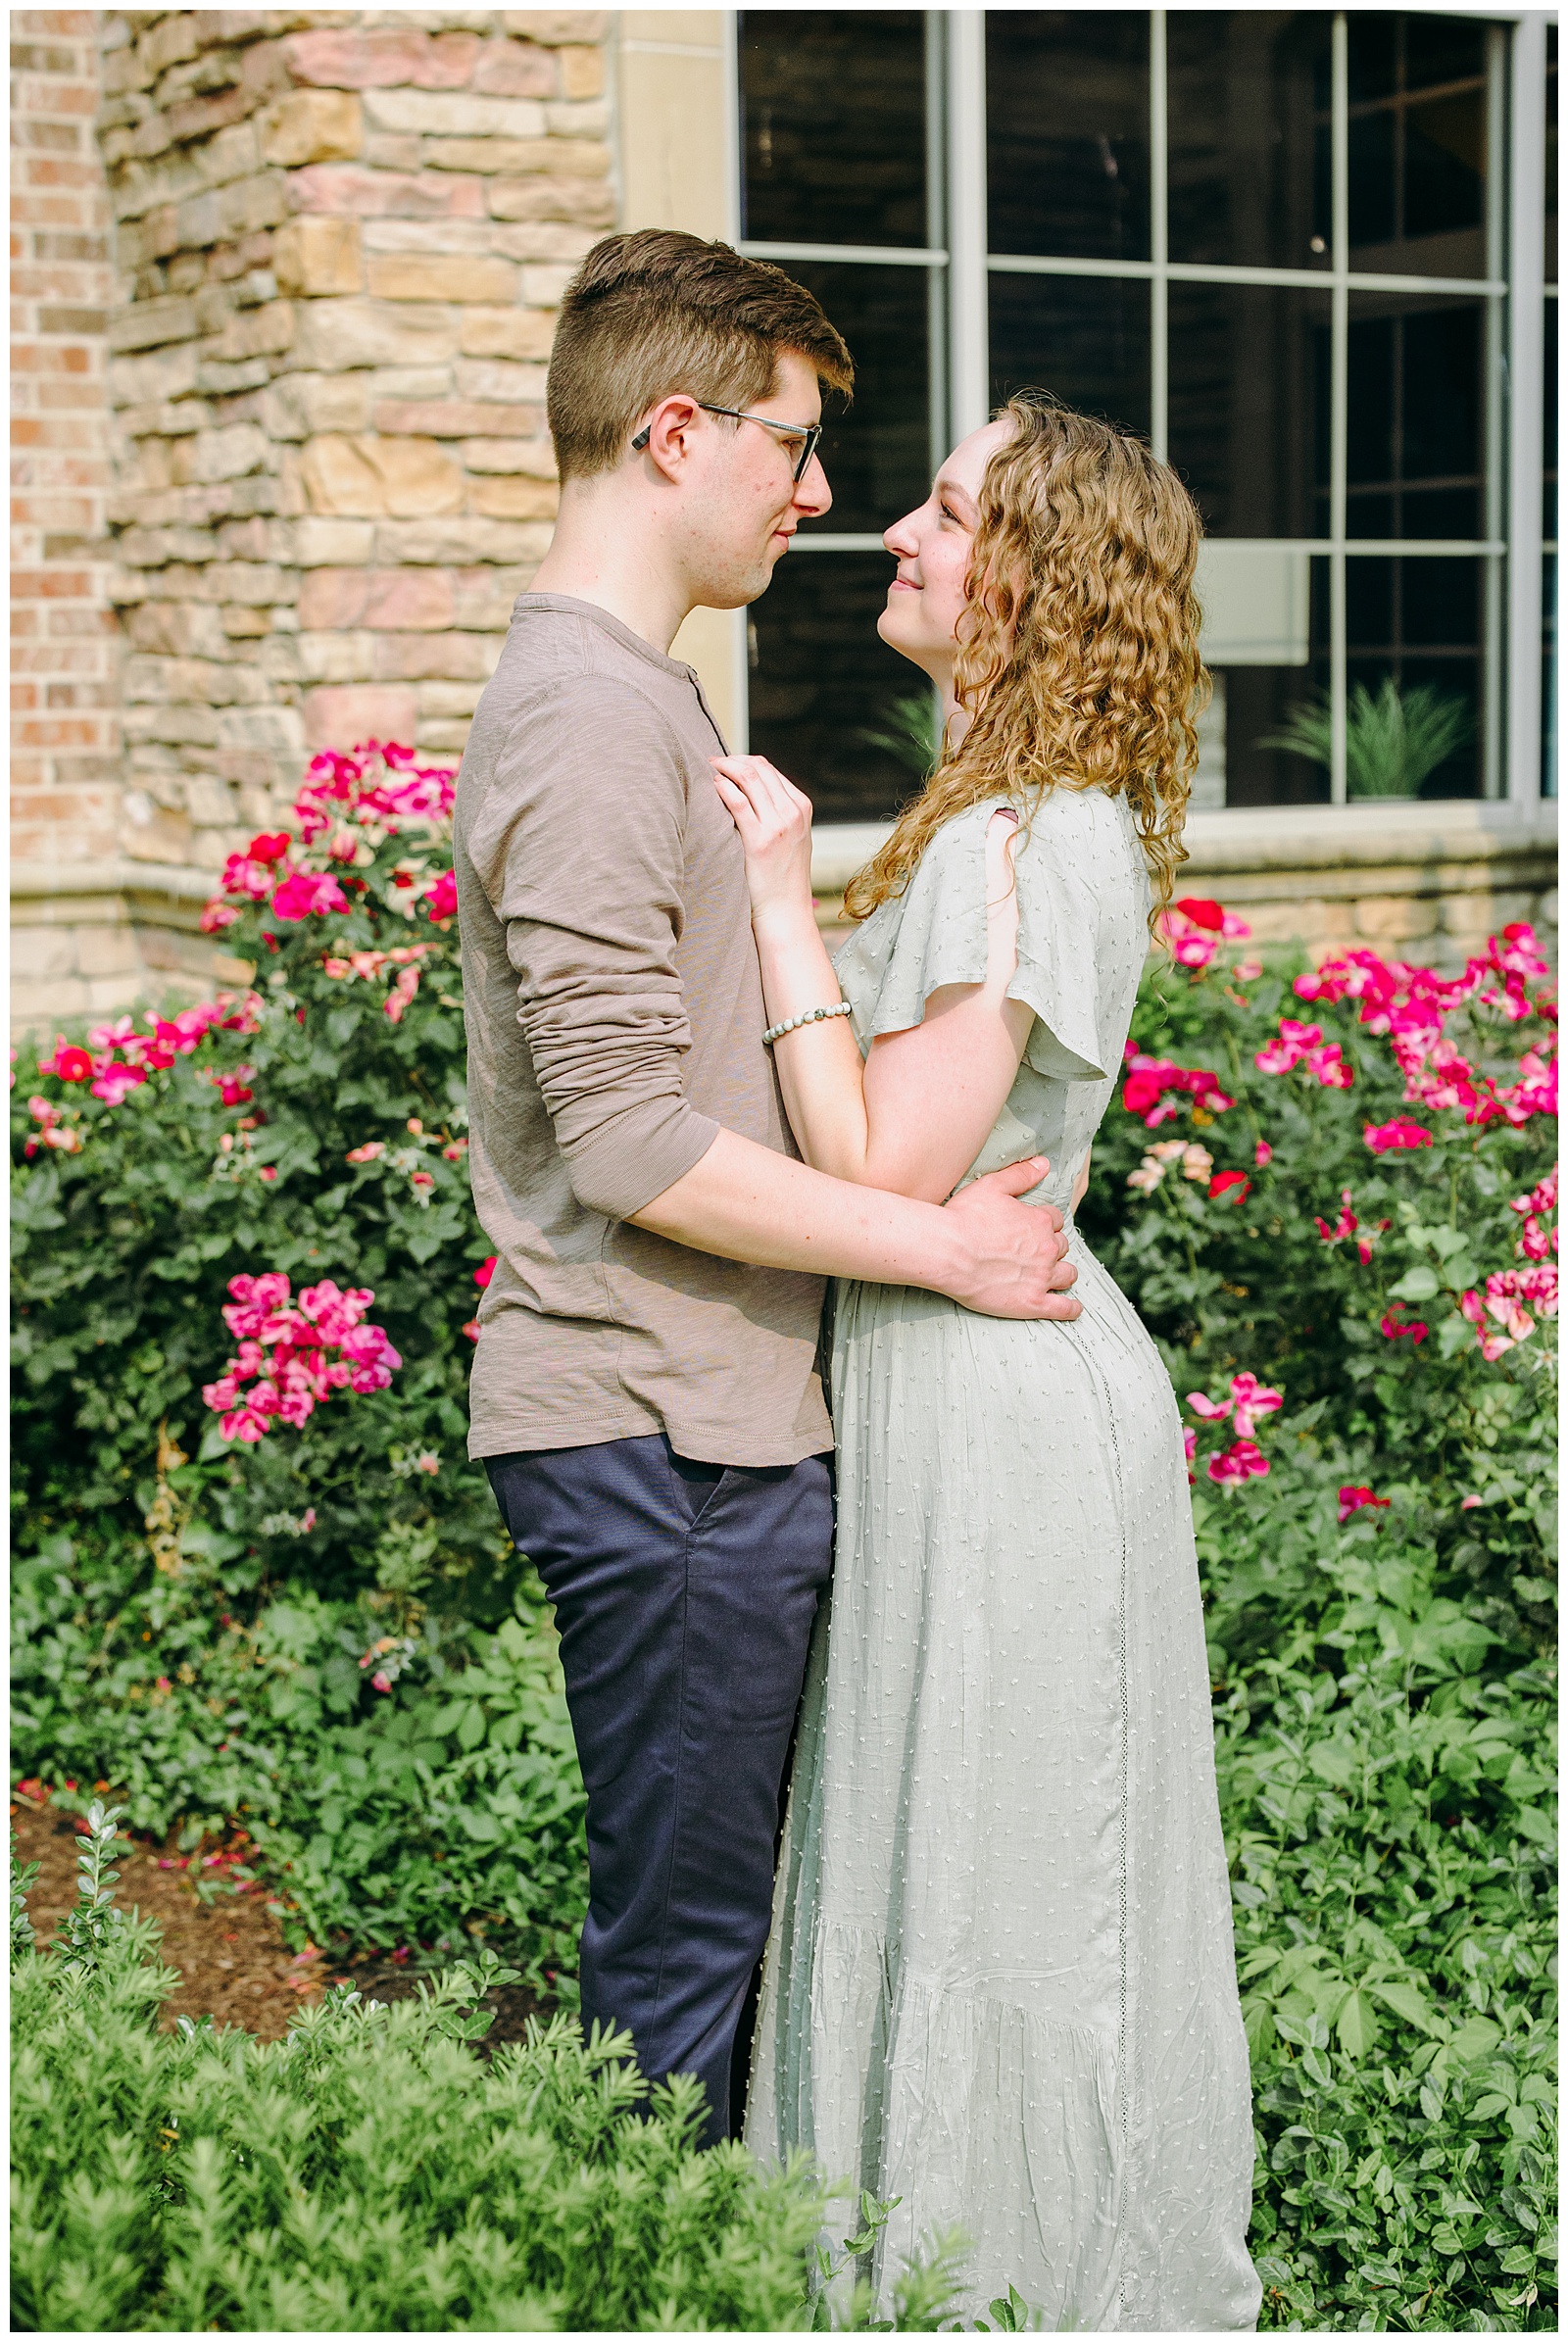 Lansdowne Resort Couples Portraits with pink flowers